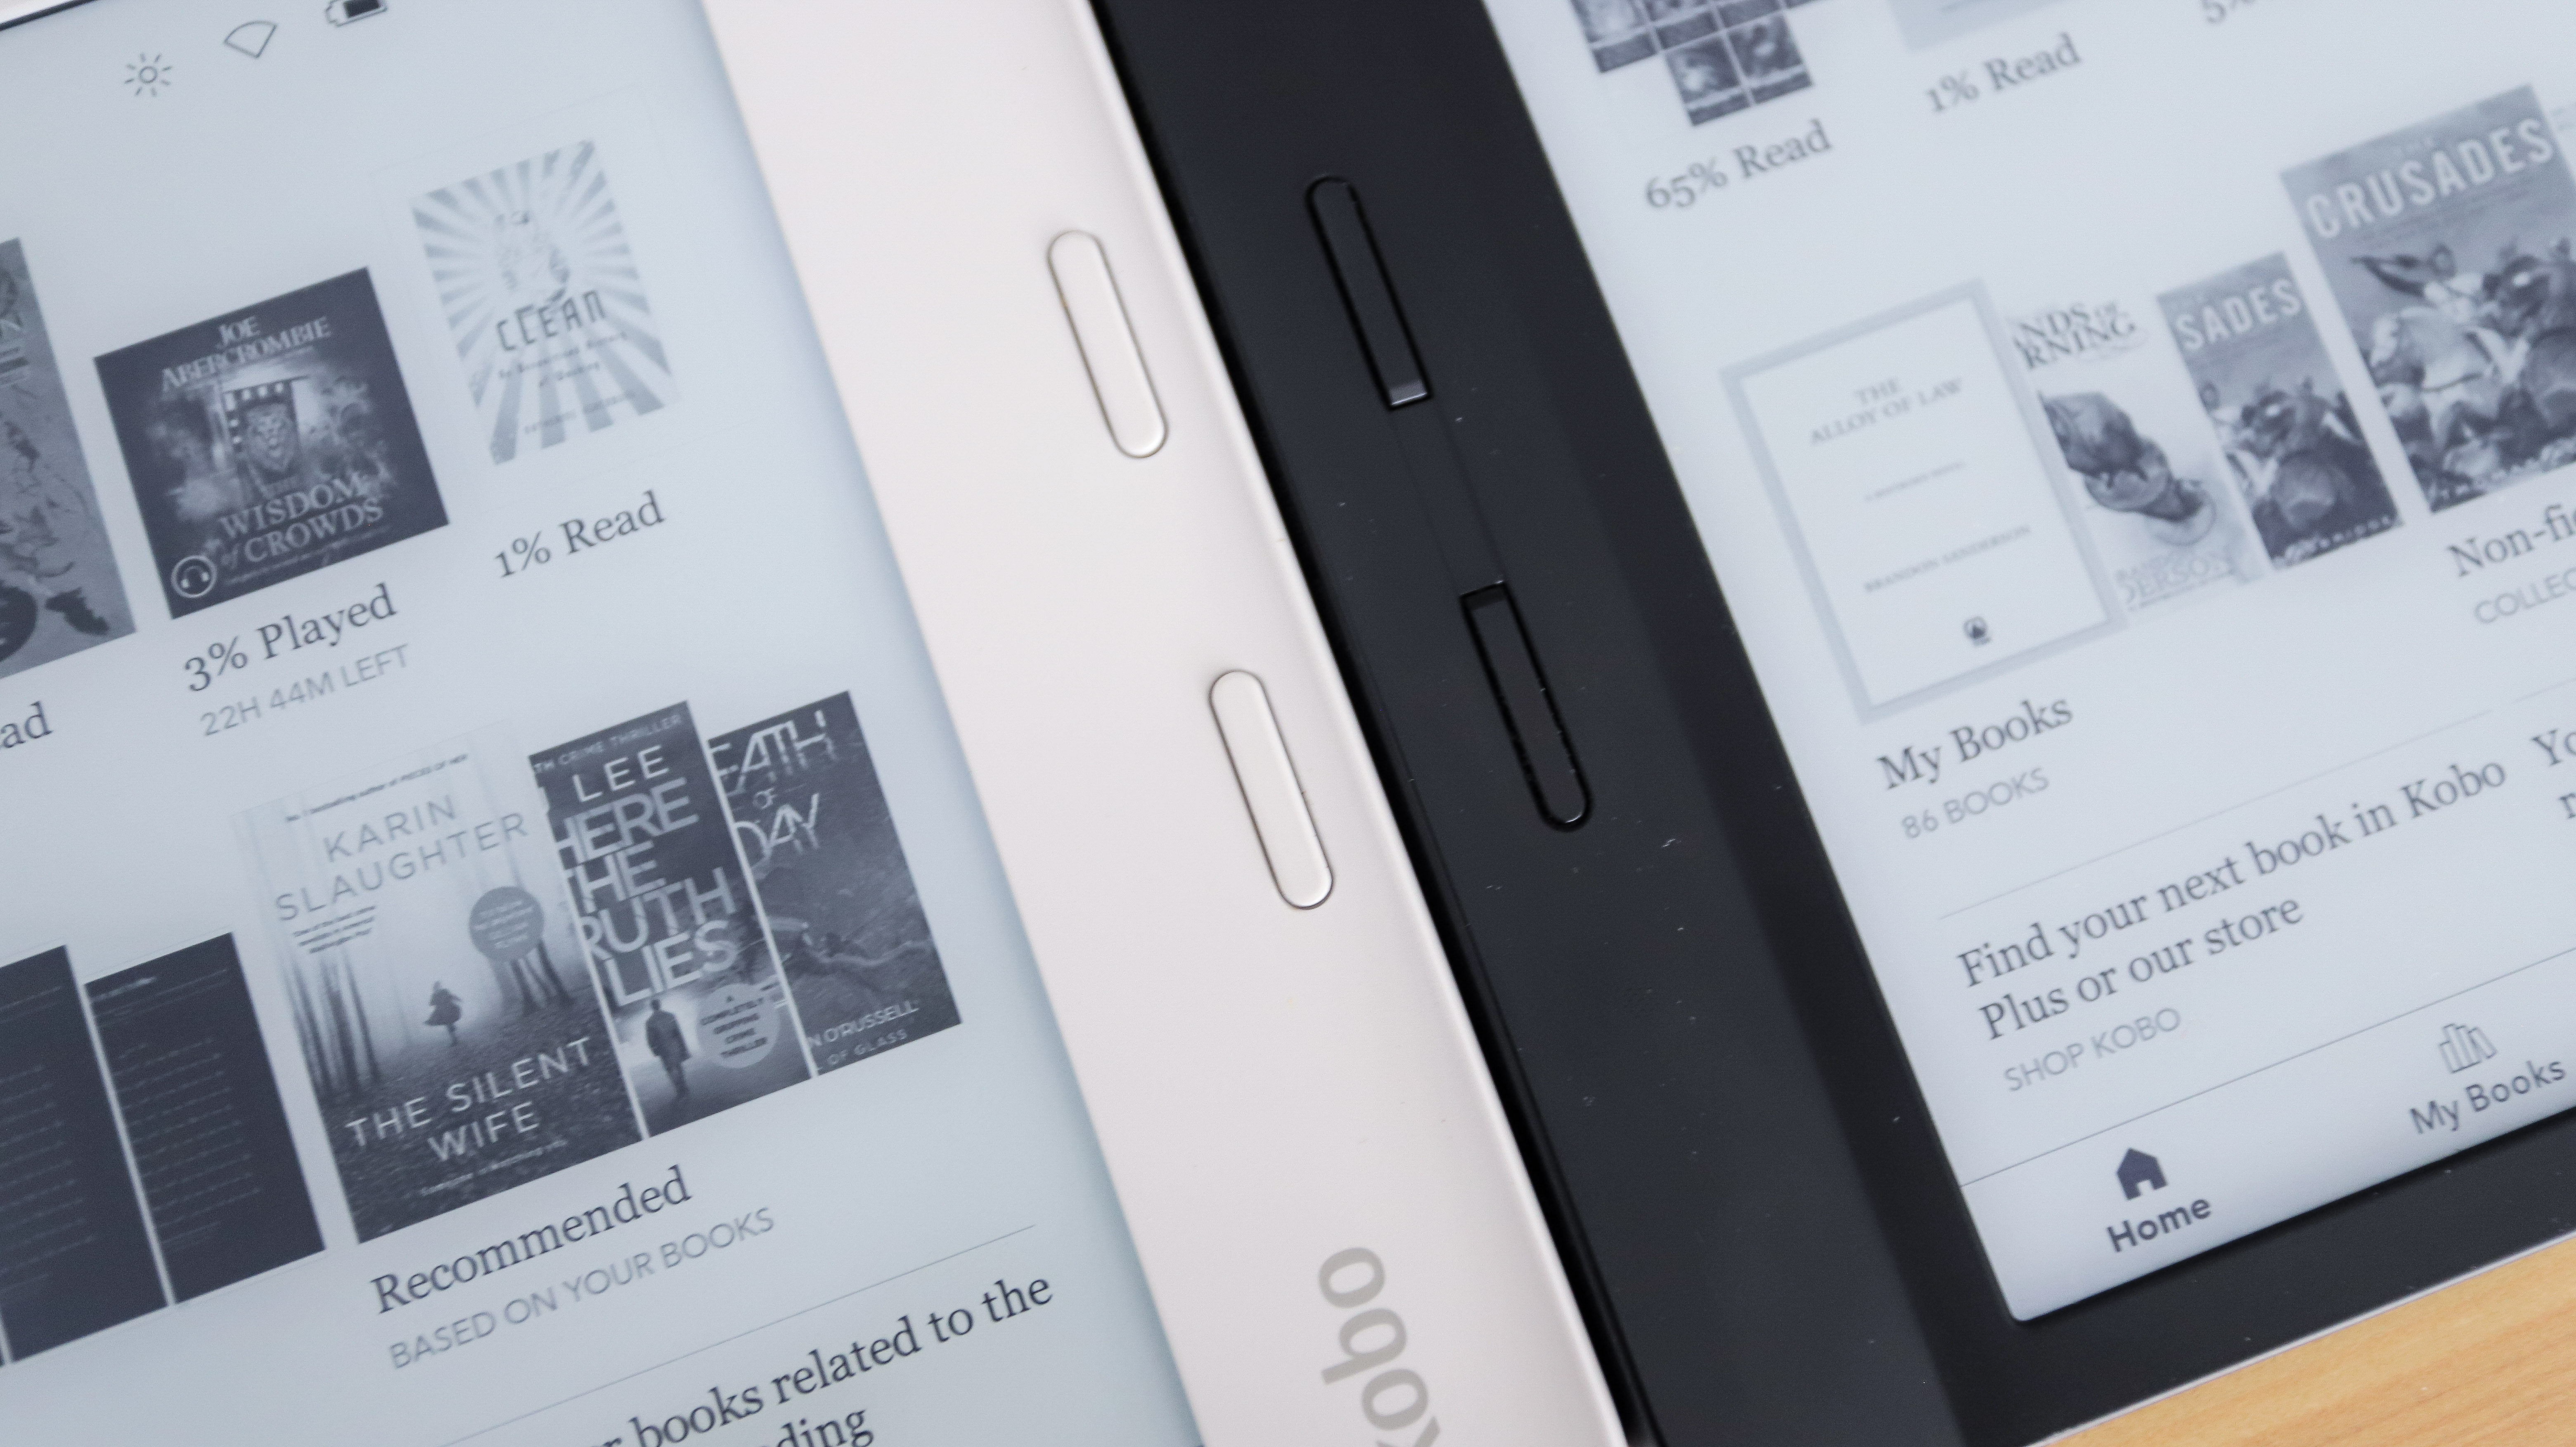 Page-turn buttons on the Kobo Libra 2 and Libra H2O